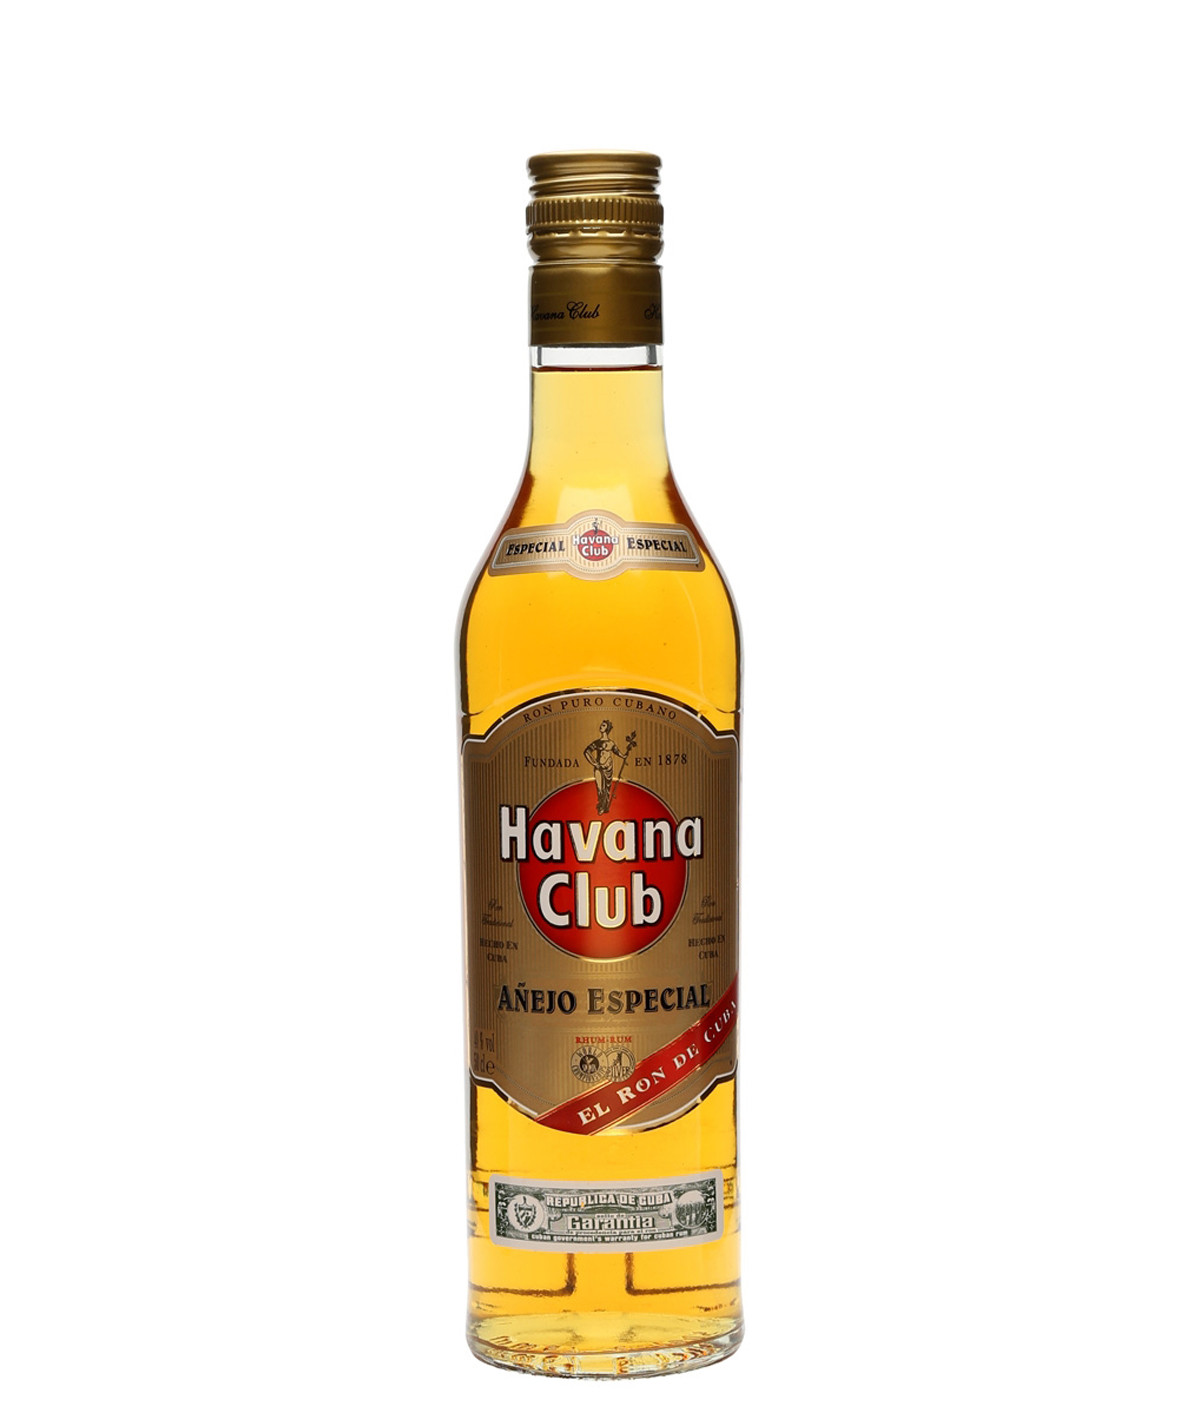 Ron Havana Club Special Age 5 years